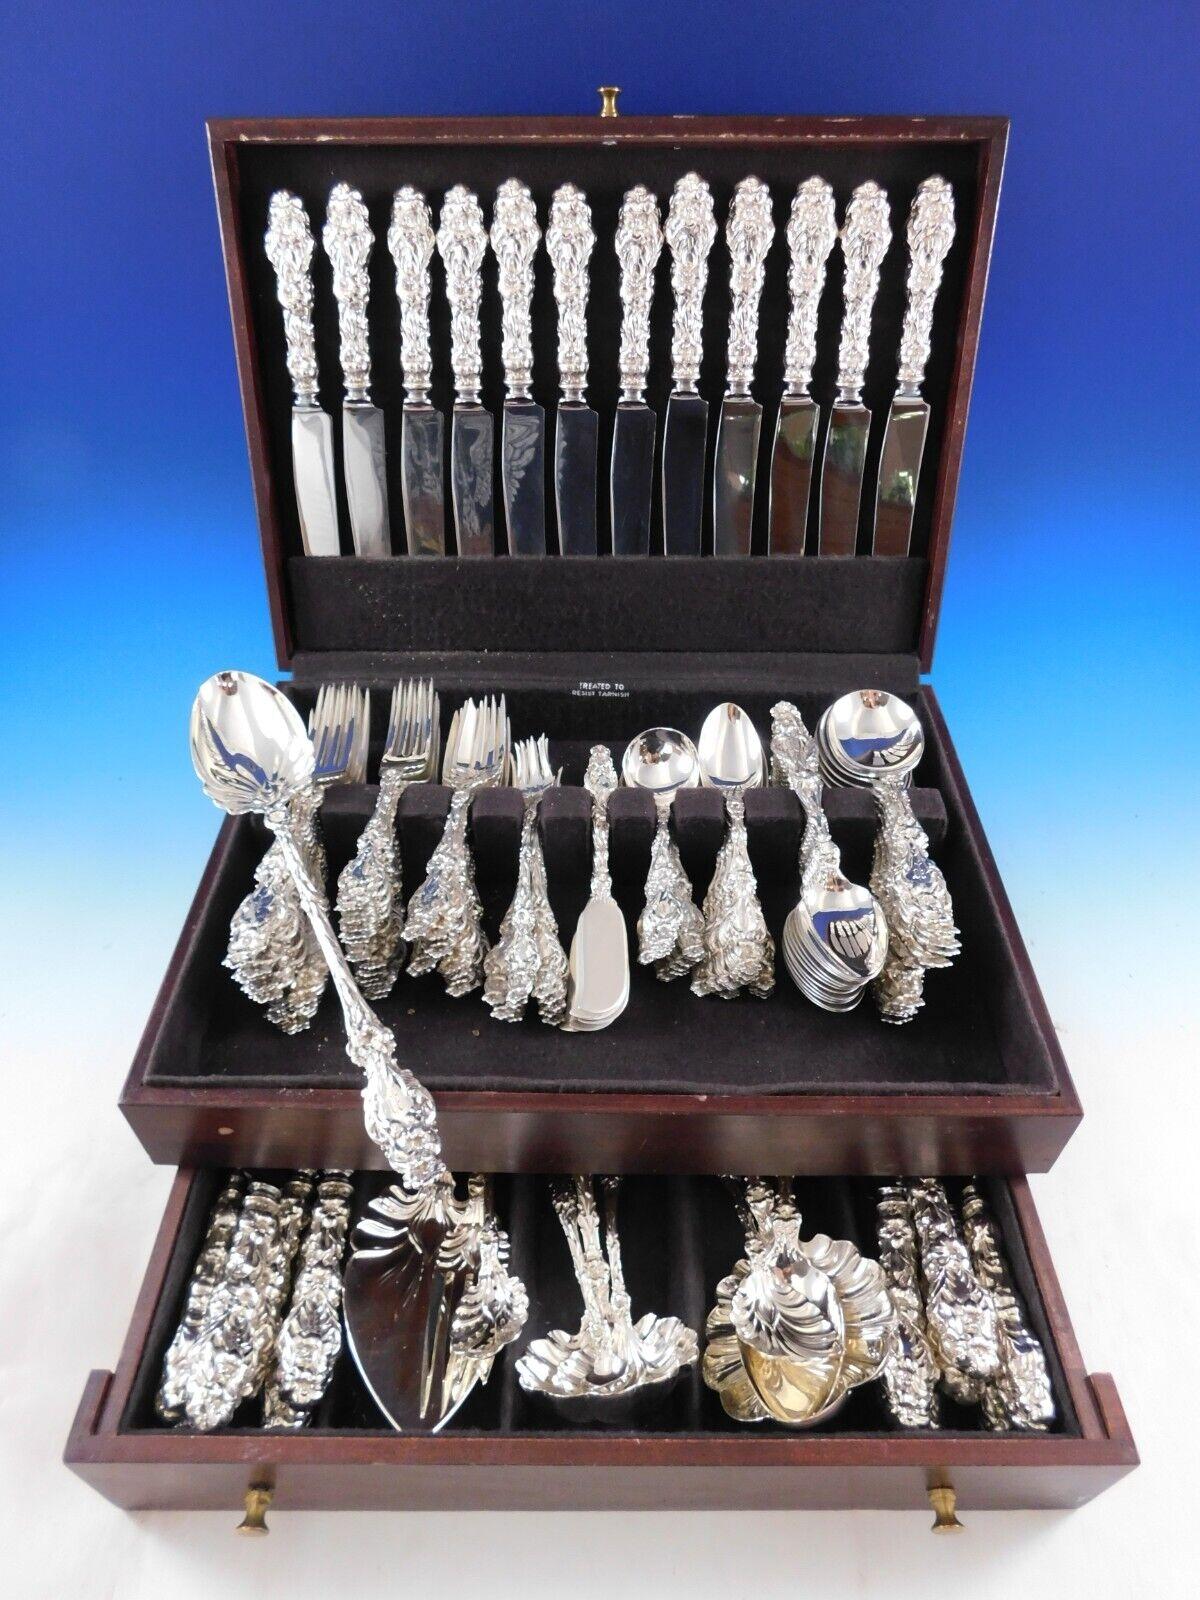 Monumental Lily by Whiting Sterling Silver Flatware set - 142 pieces. This set includes:

12 Dinner Size Knives with hand cast handles, 9 3/8